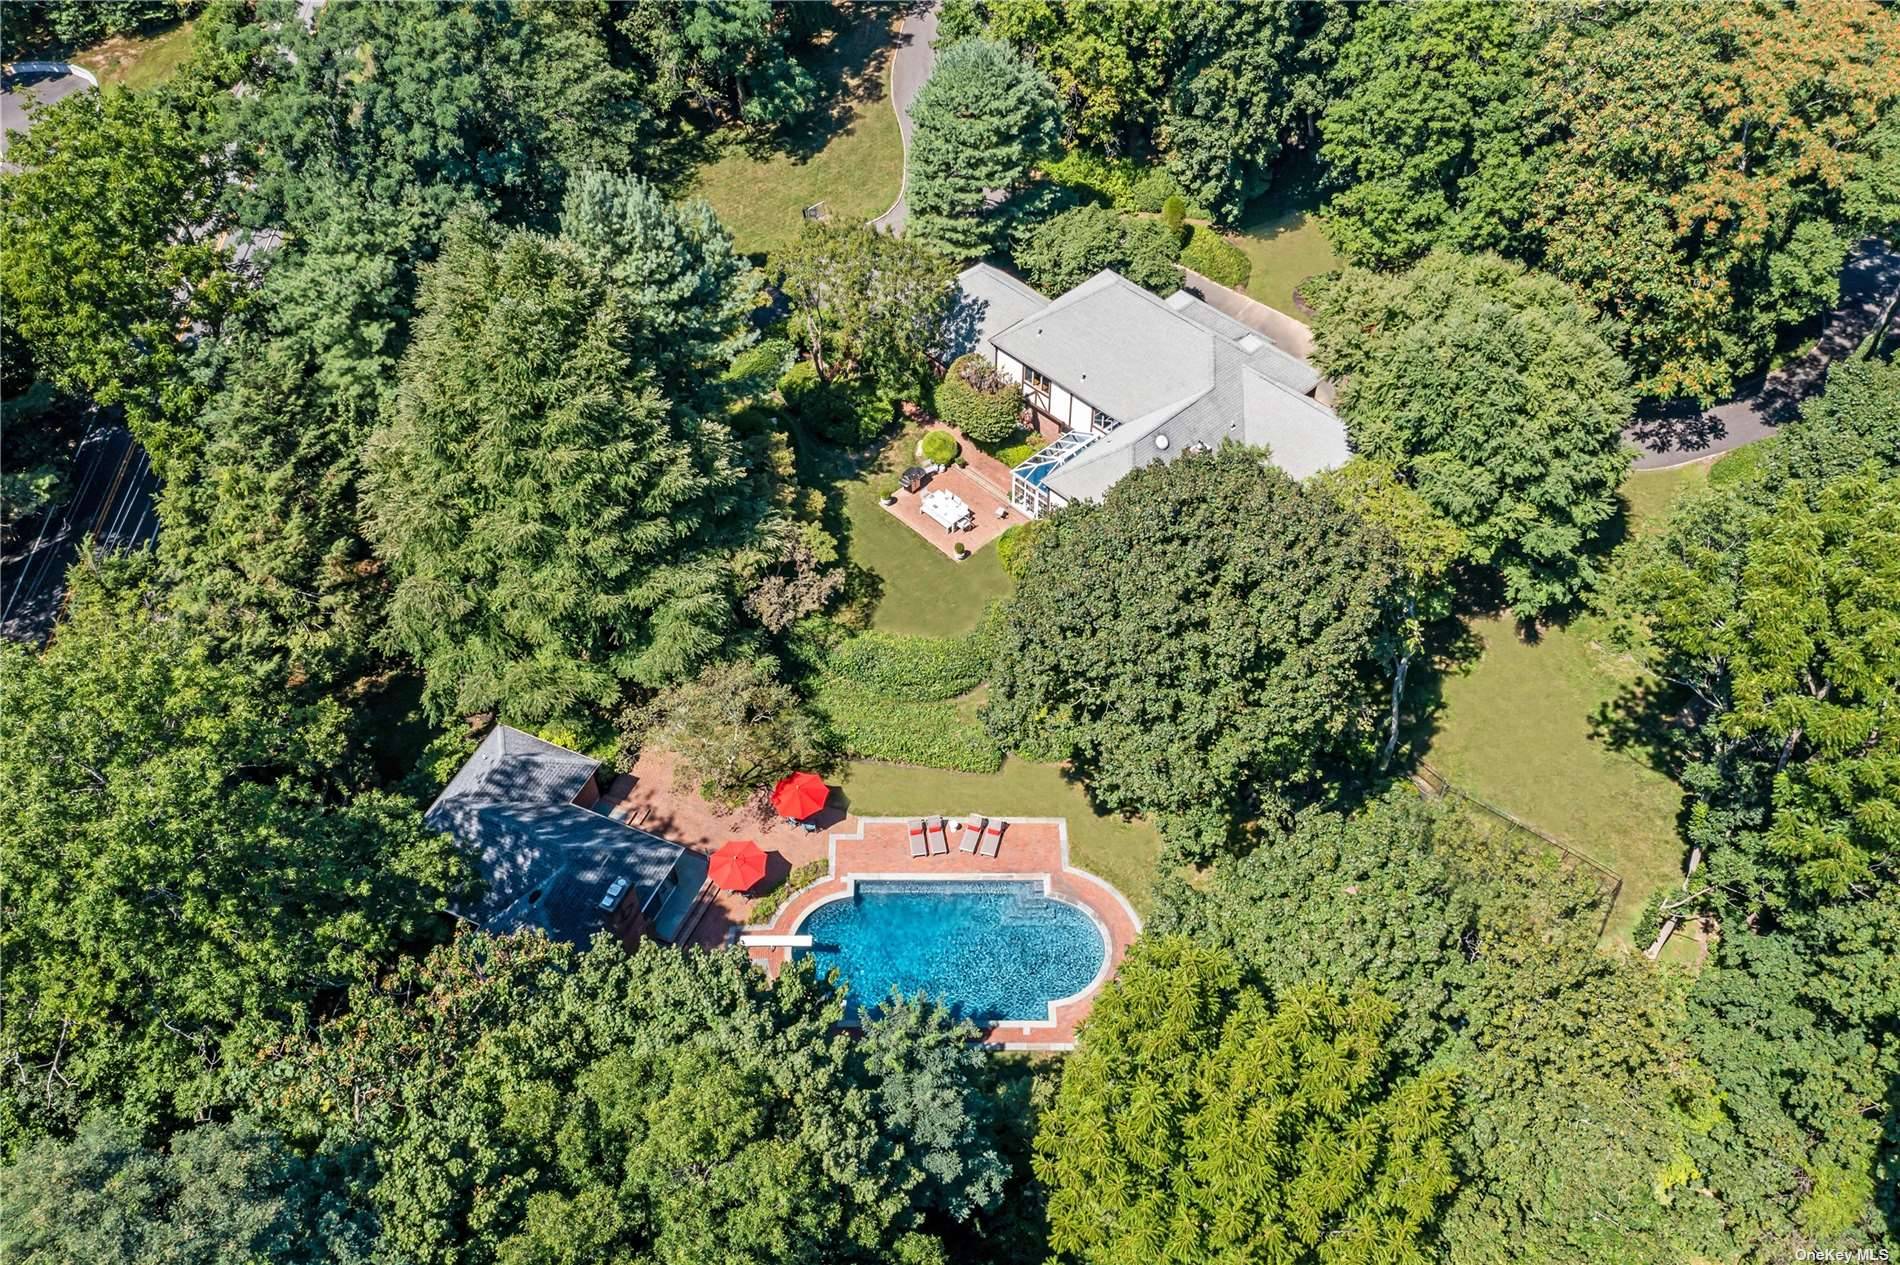 2 Sousa Drive is a brick and stucco Tudor Colonial and Cottage house situated on 2 pristine acres in the sought after Village of Sands Point.